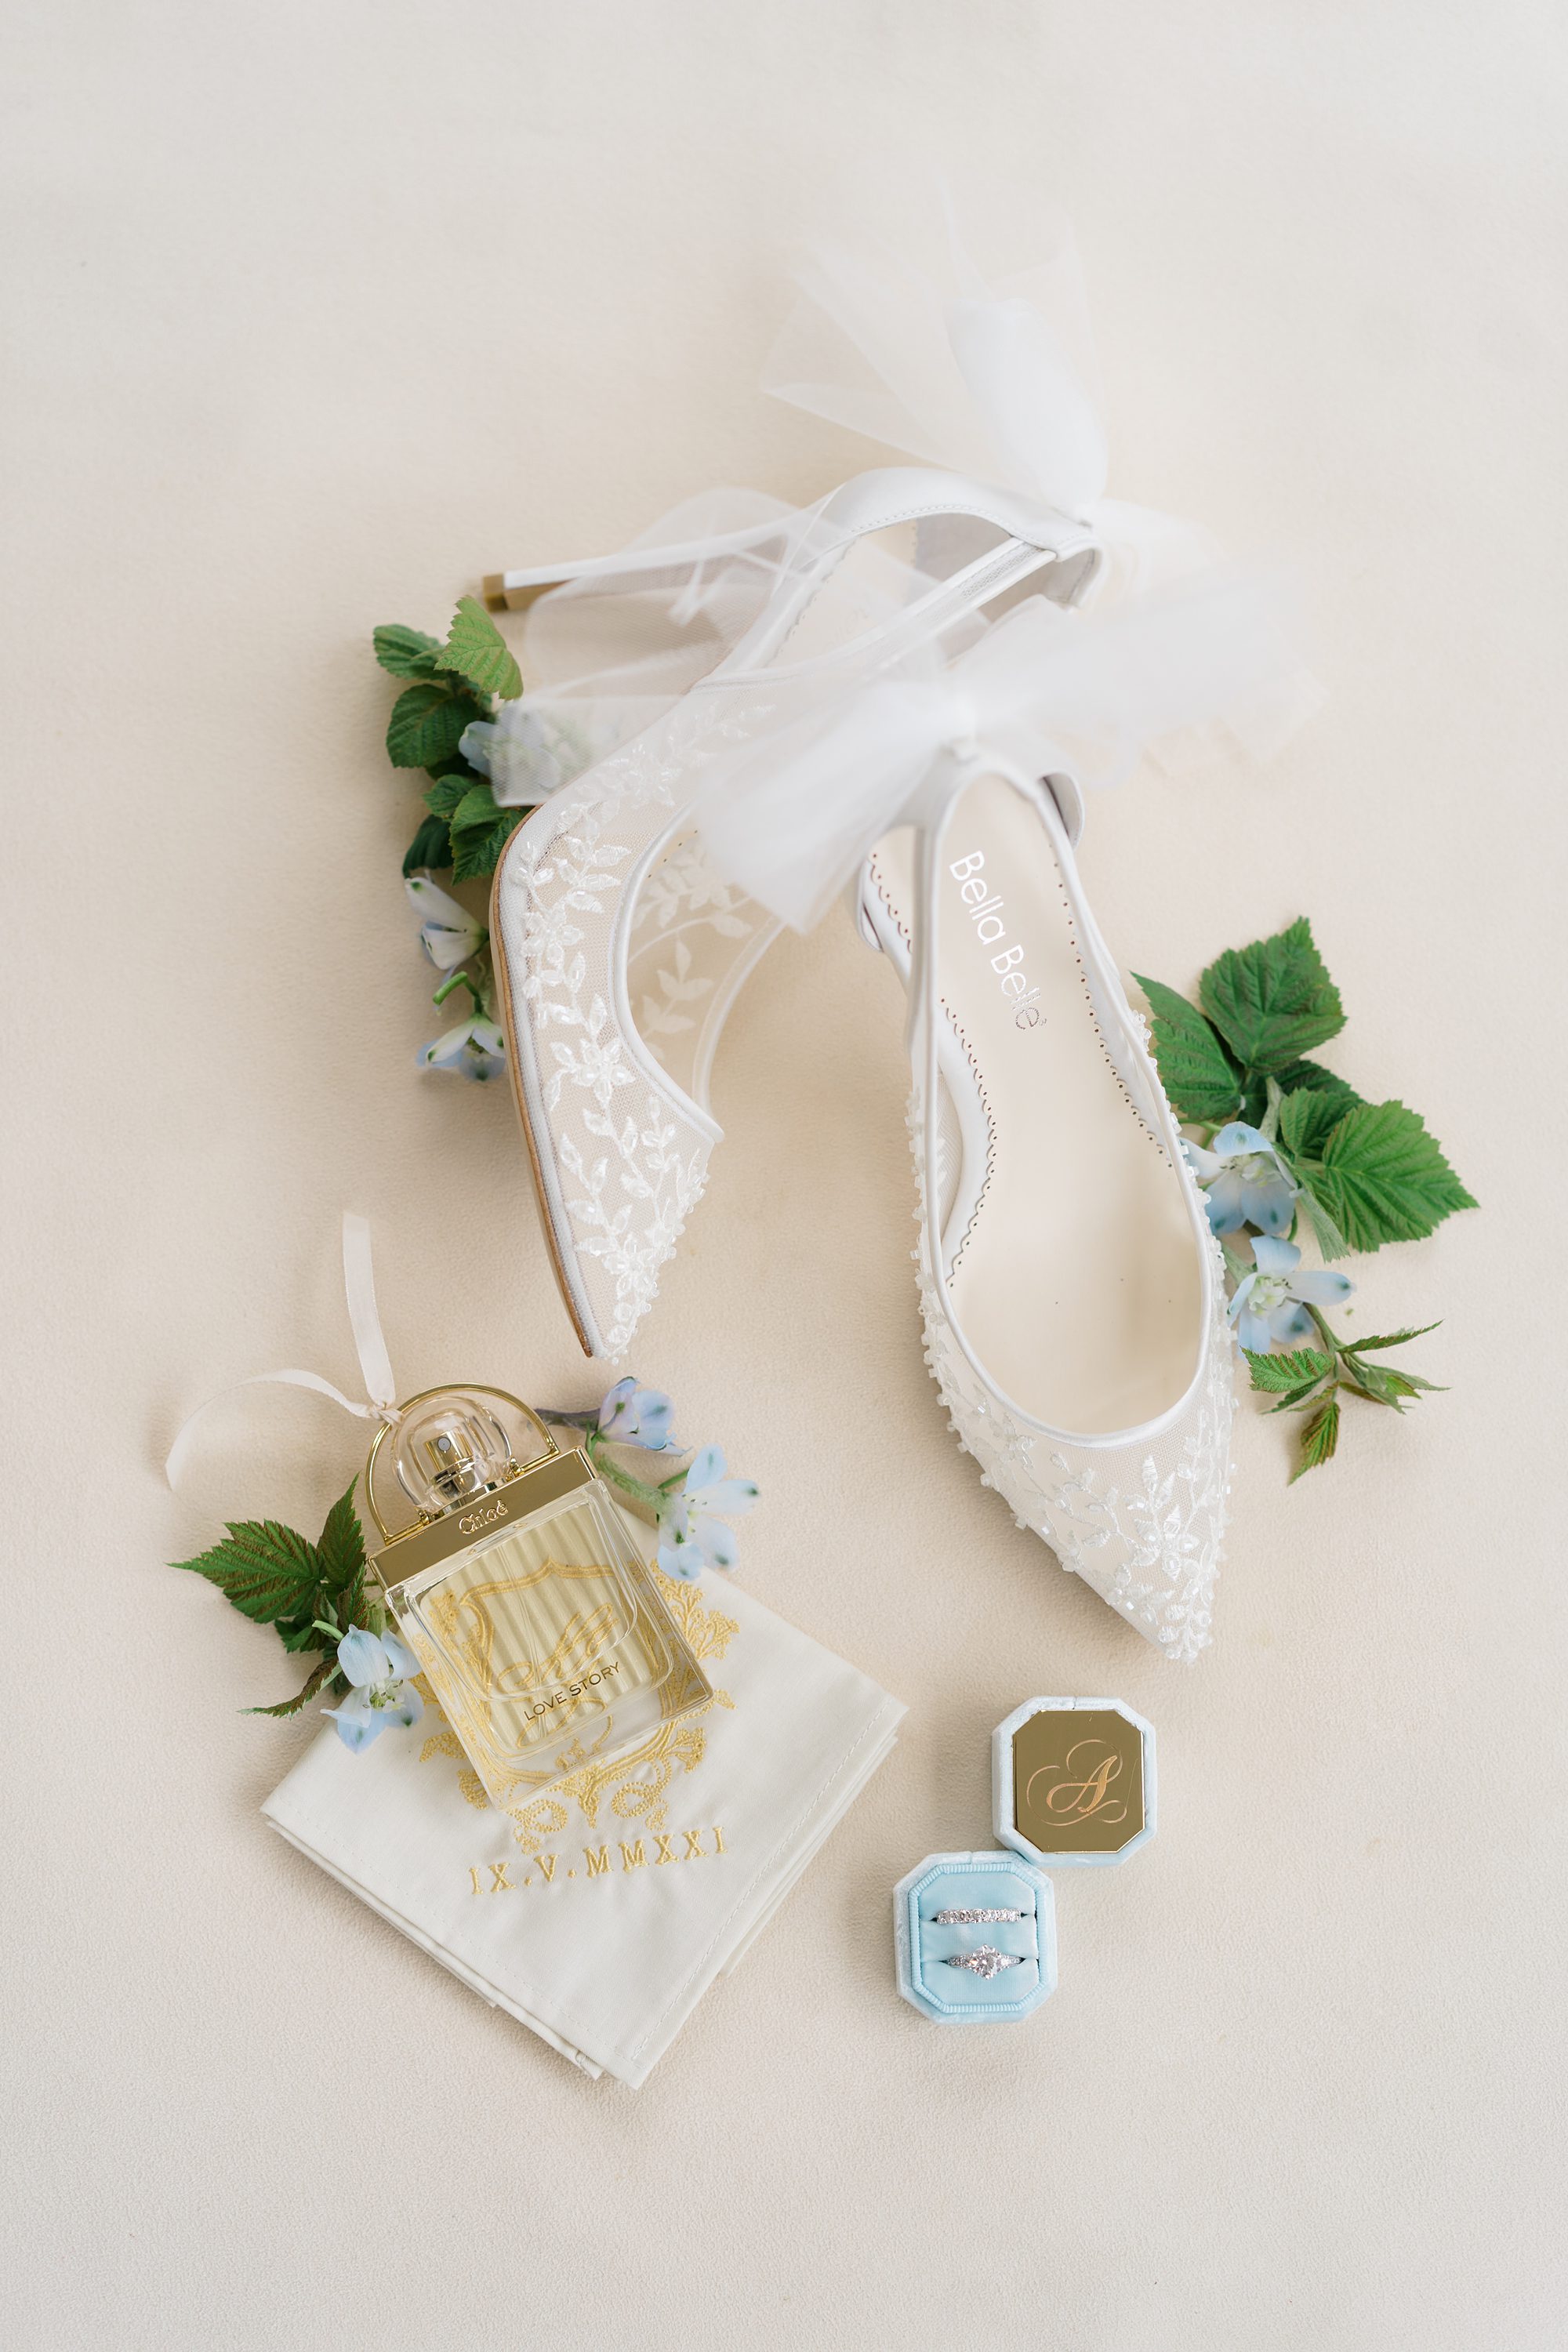 Wedding Day Details to have ready for your photographer